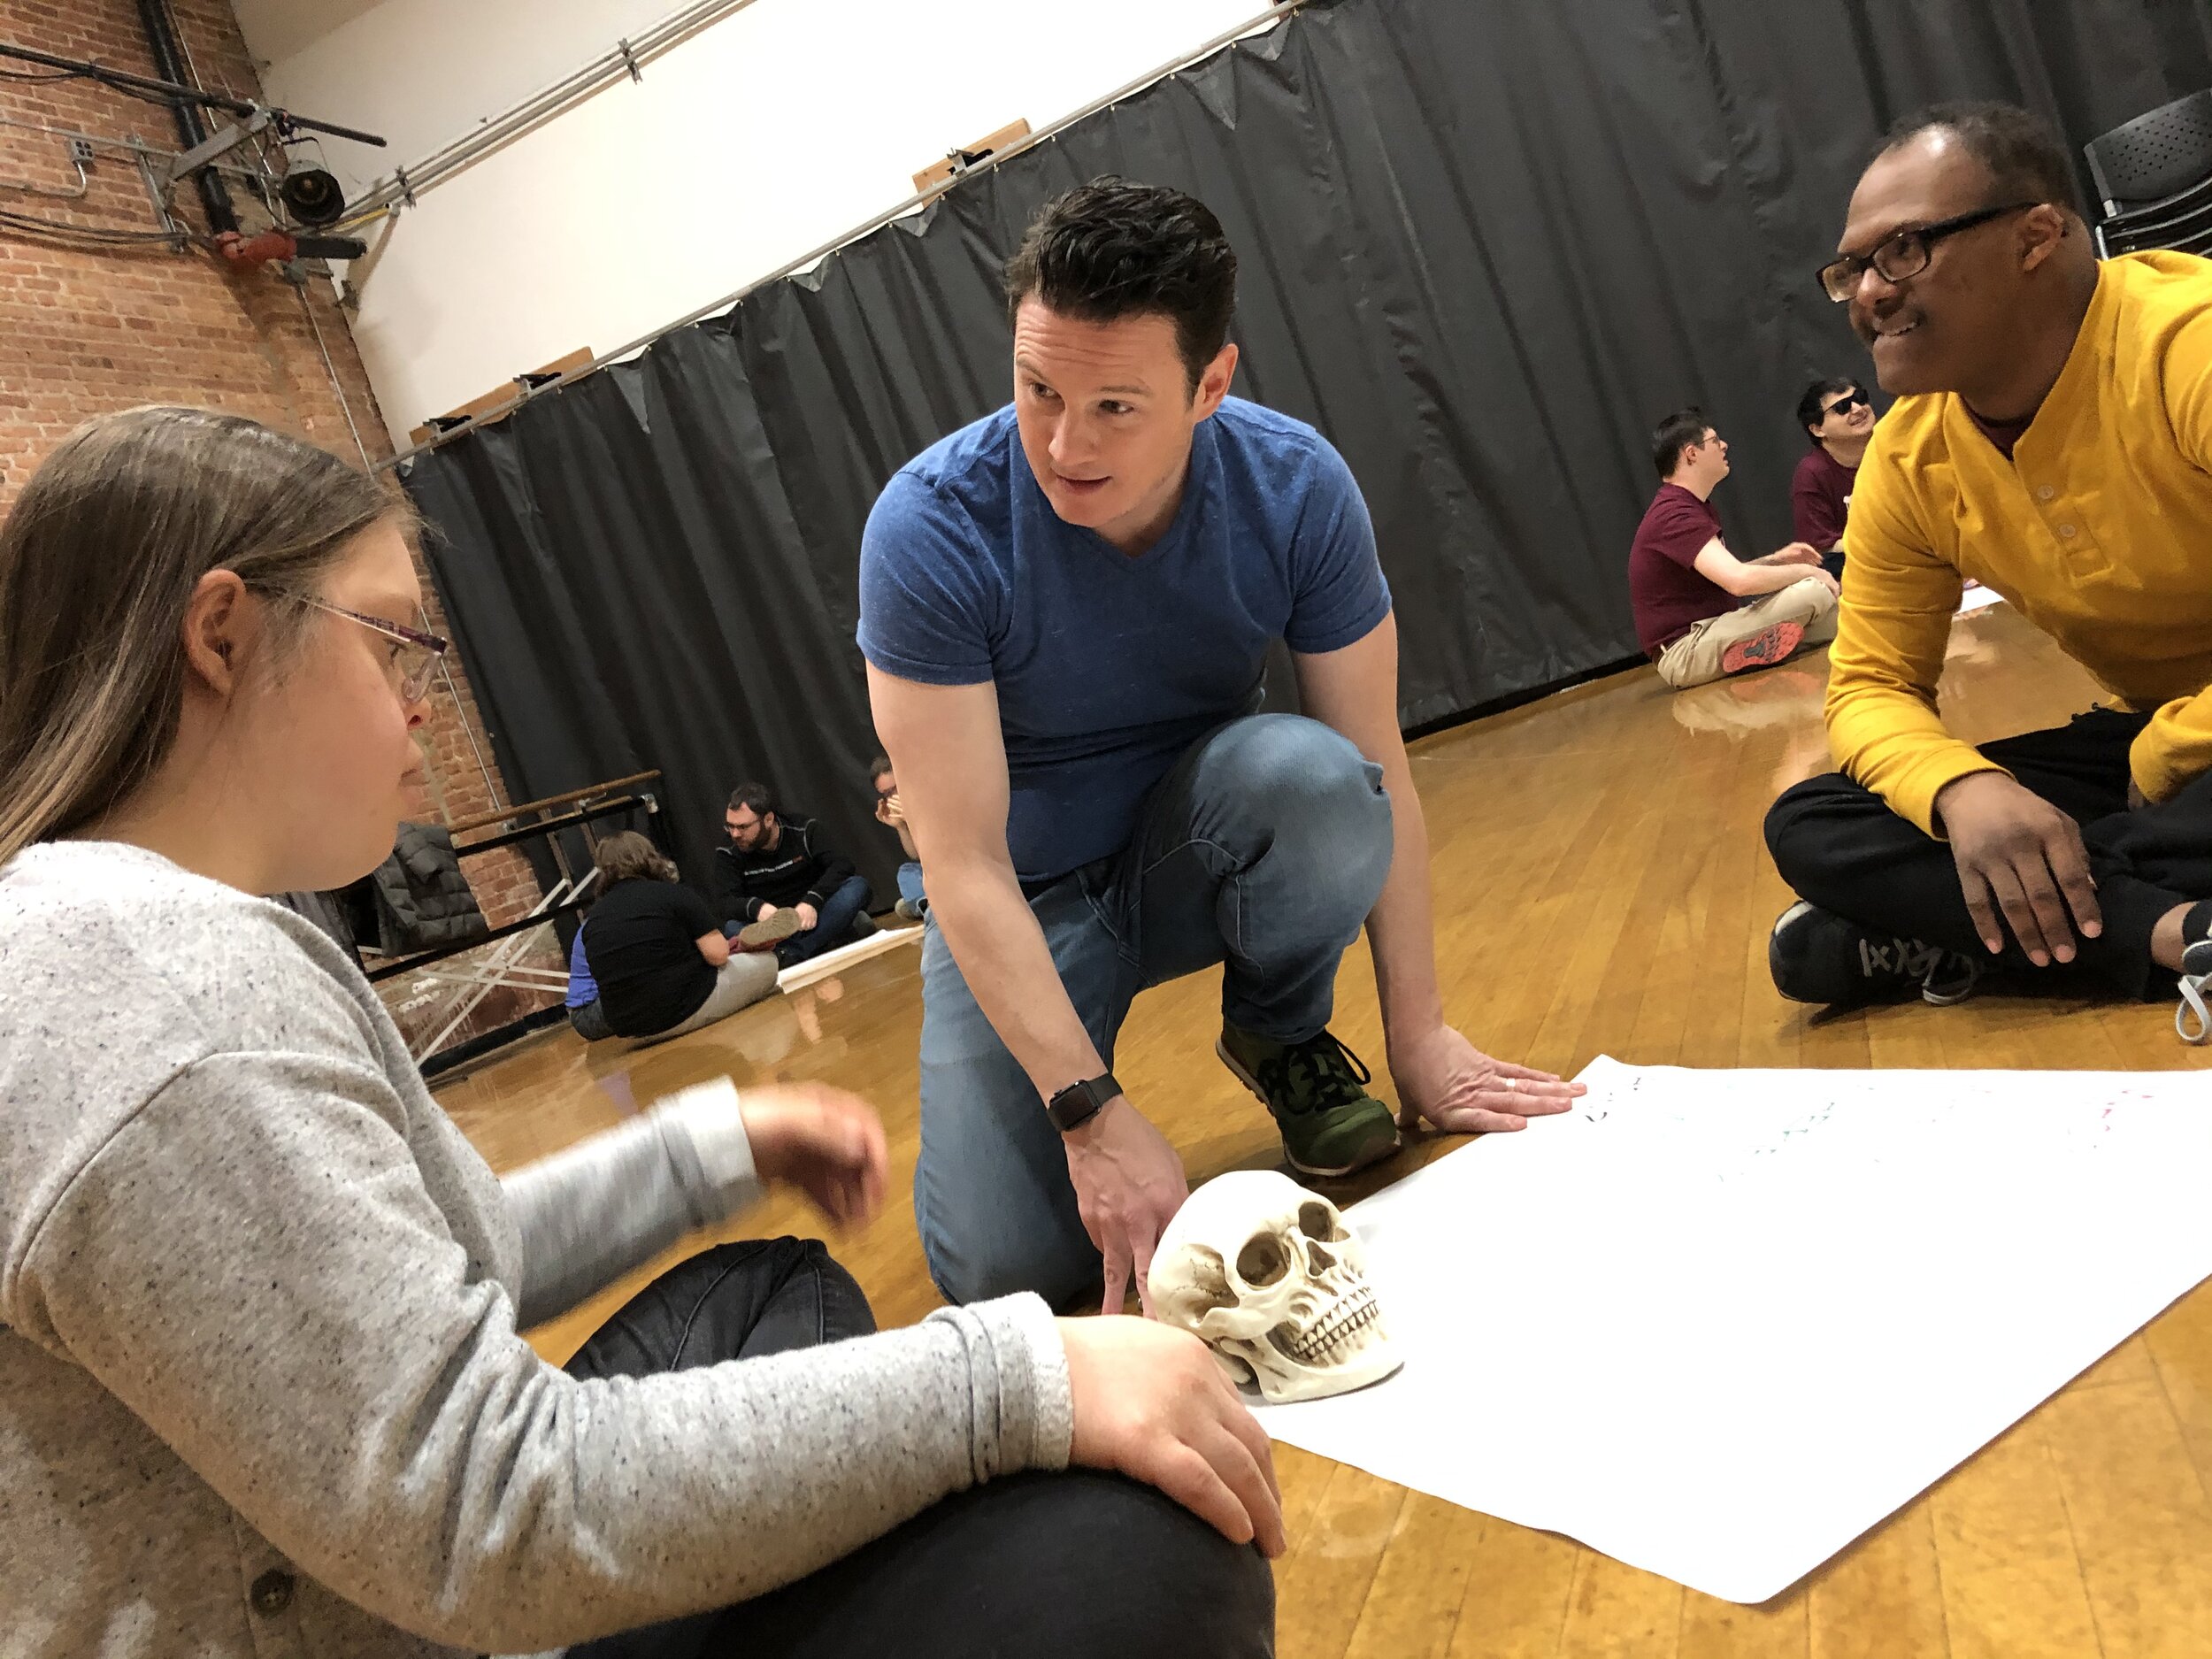 Lawrence discusses the story of the skull with Emily and Ben